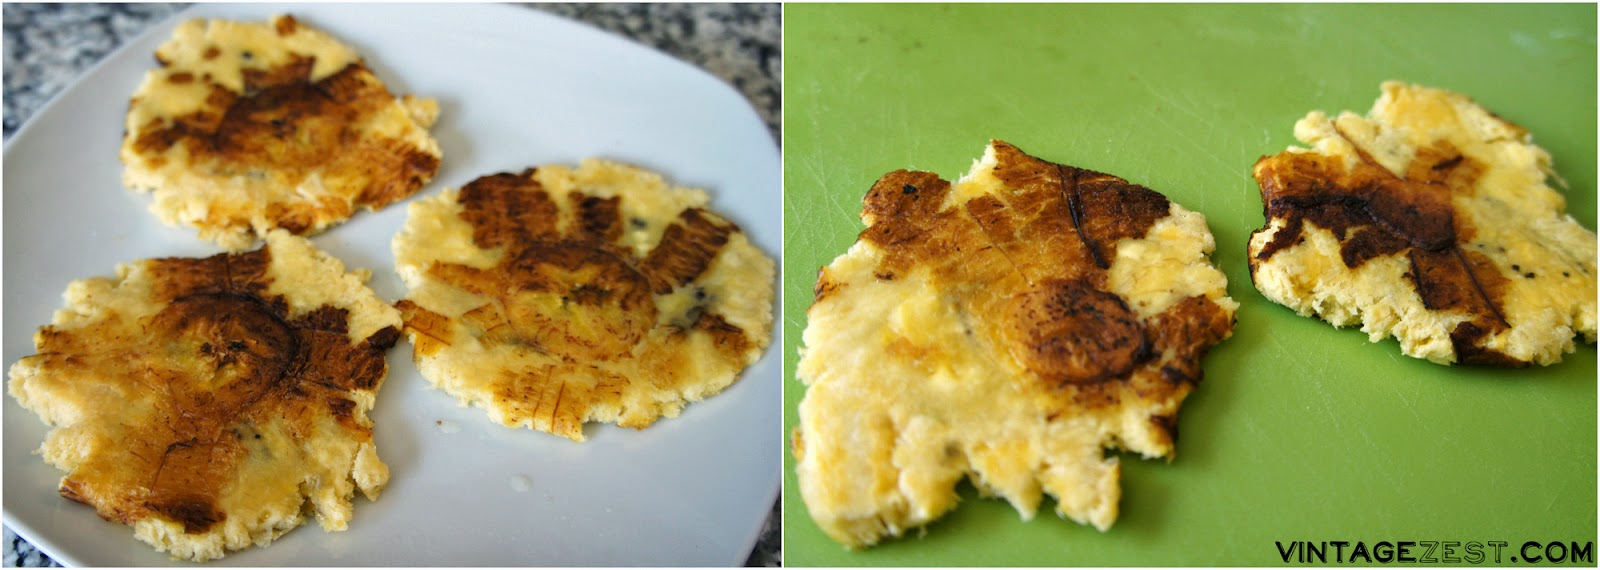 Patacones (Fried Green Plantains) on Diane's Vintage Zest!  #recipe #cooking #appetizer